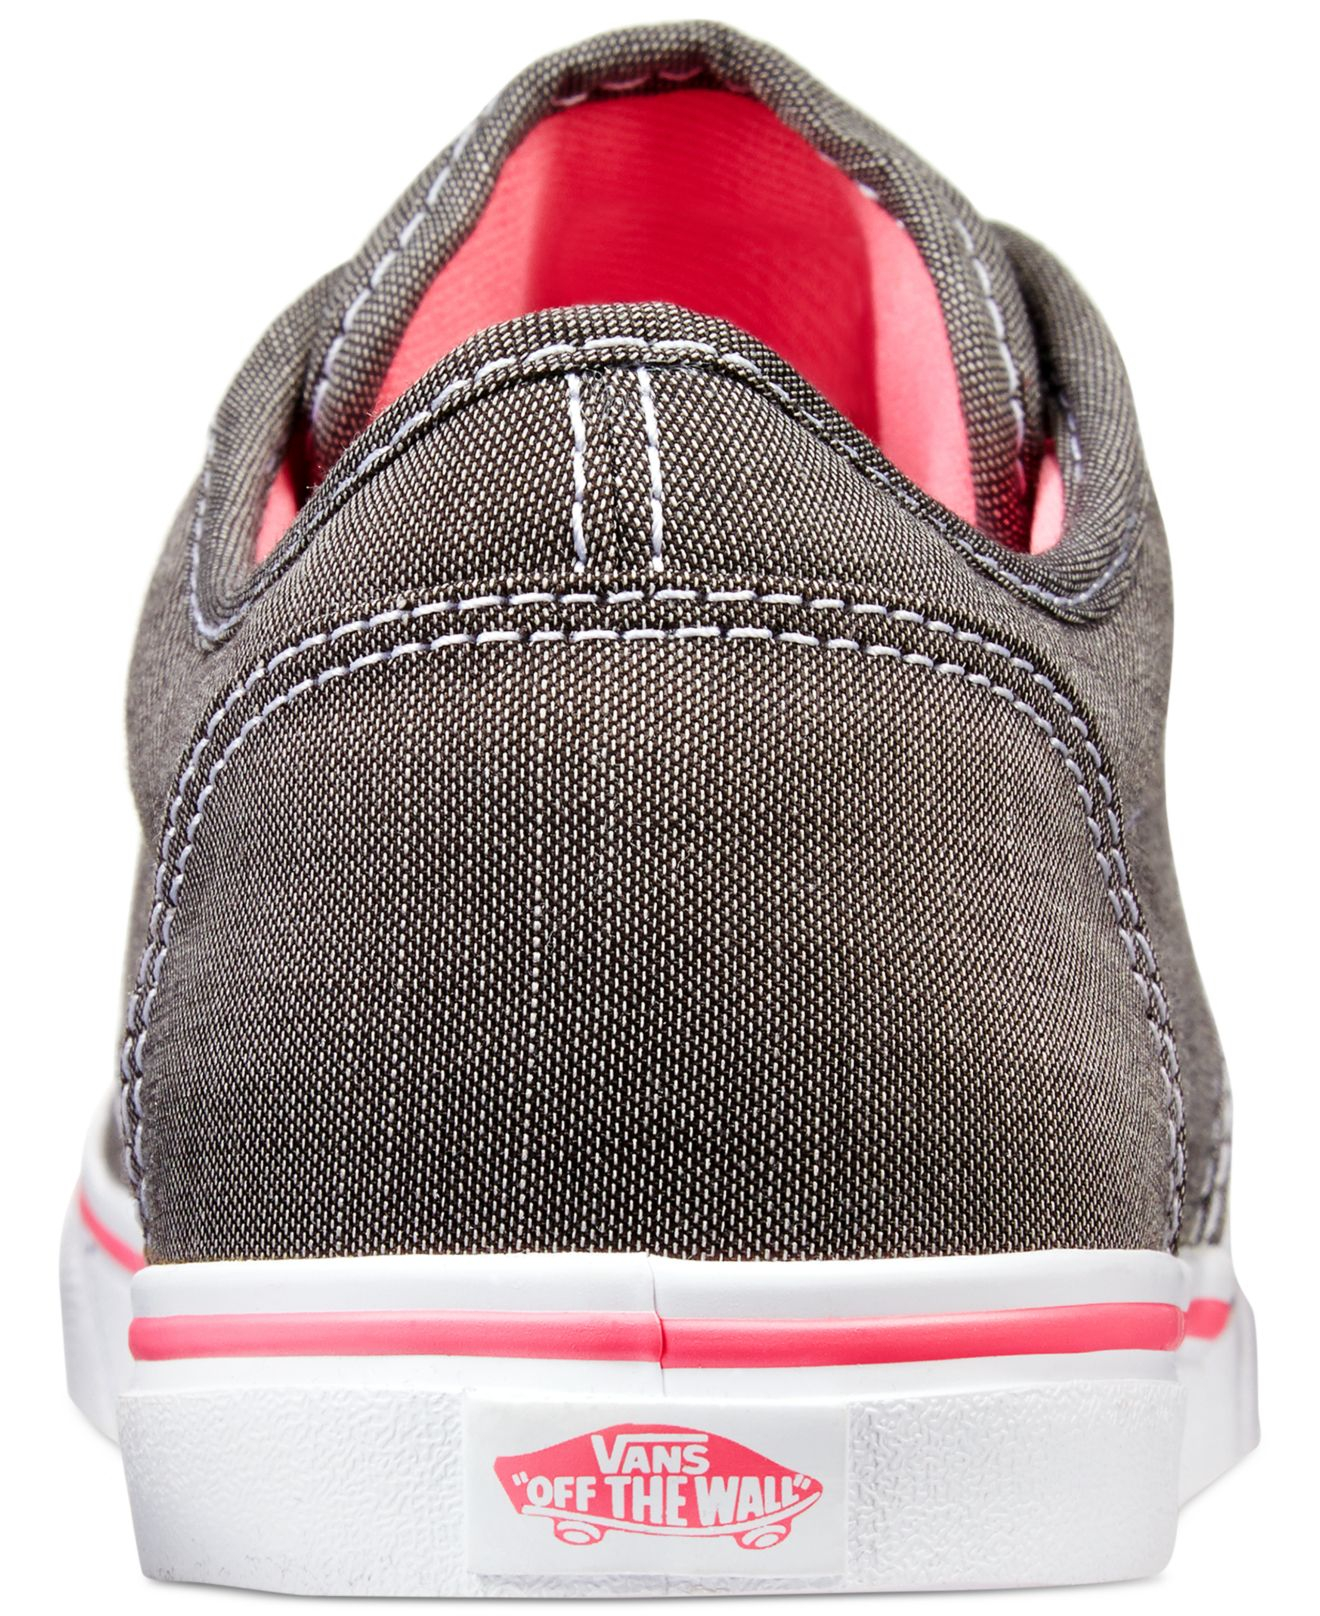 vans womens shoes atwood low sneakers